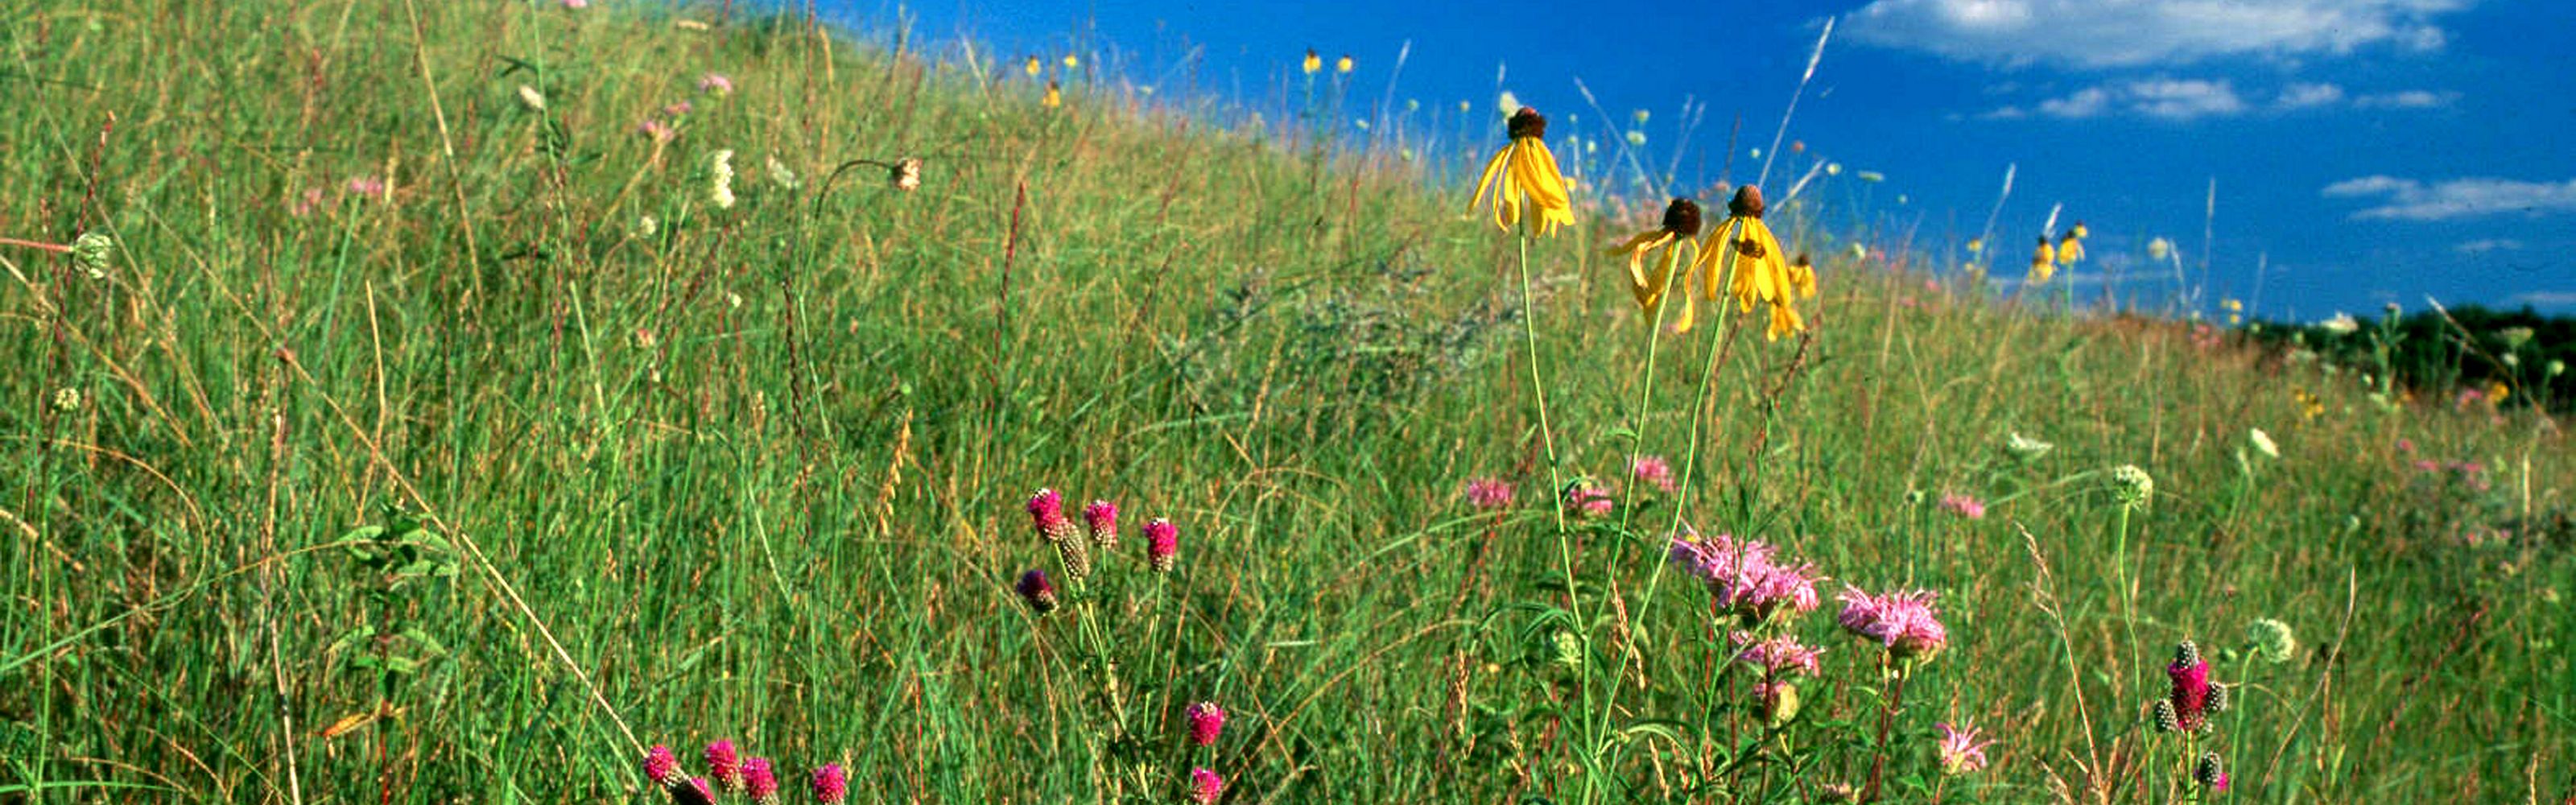 Close-up of wildflowers in a grassy meadow on a hillside.